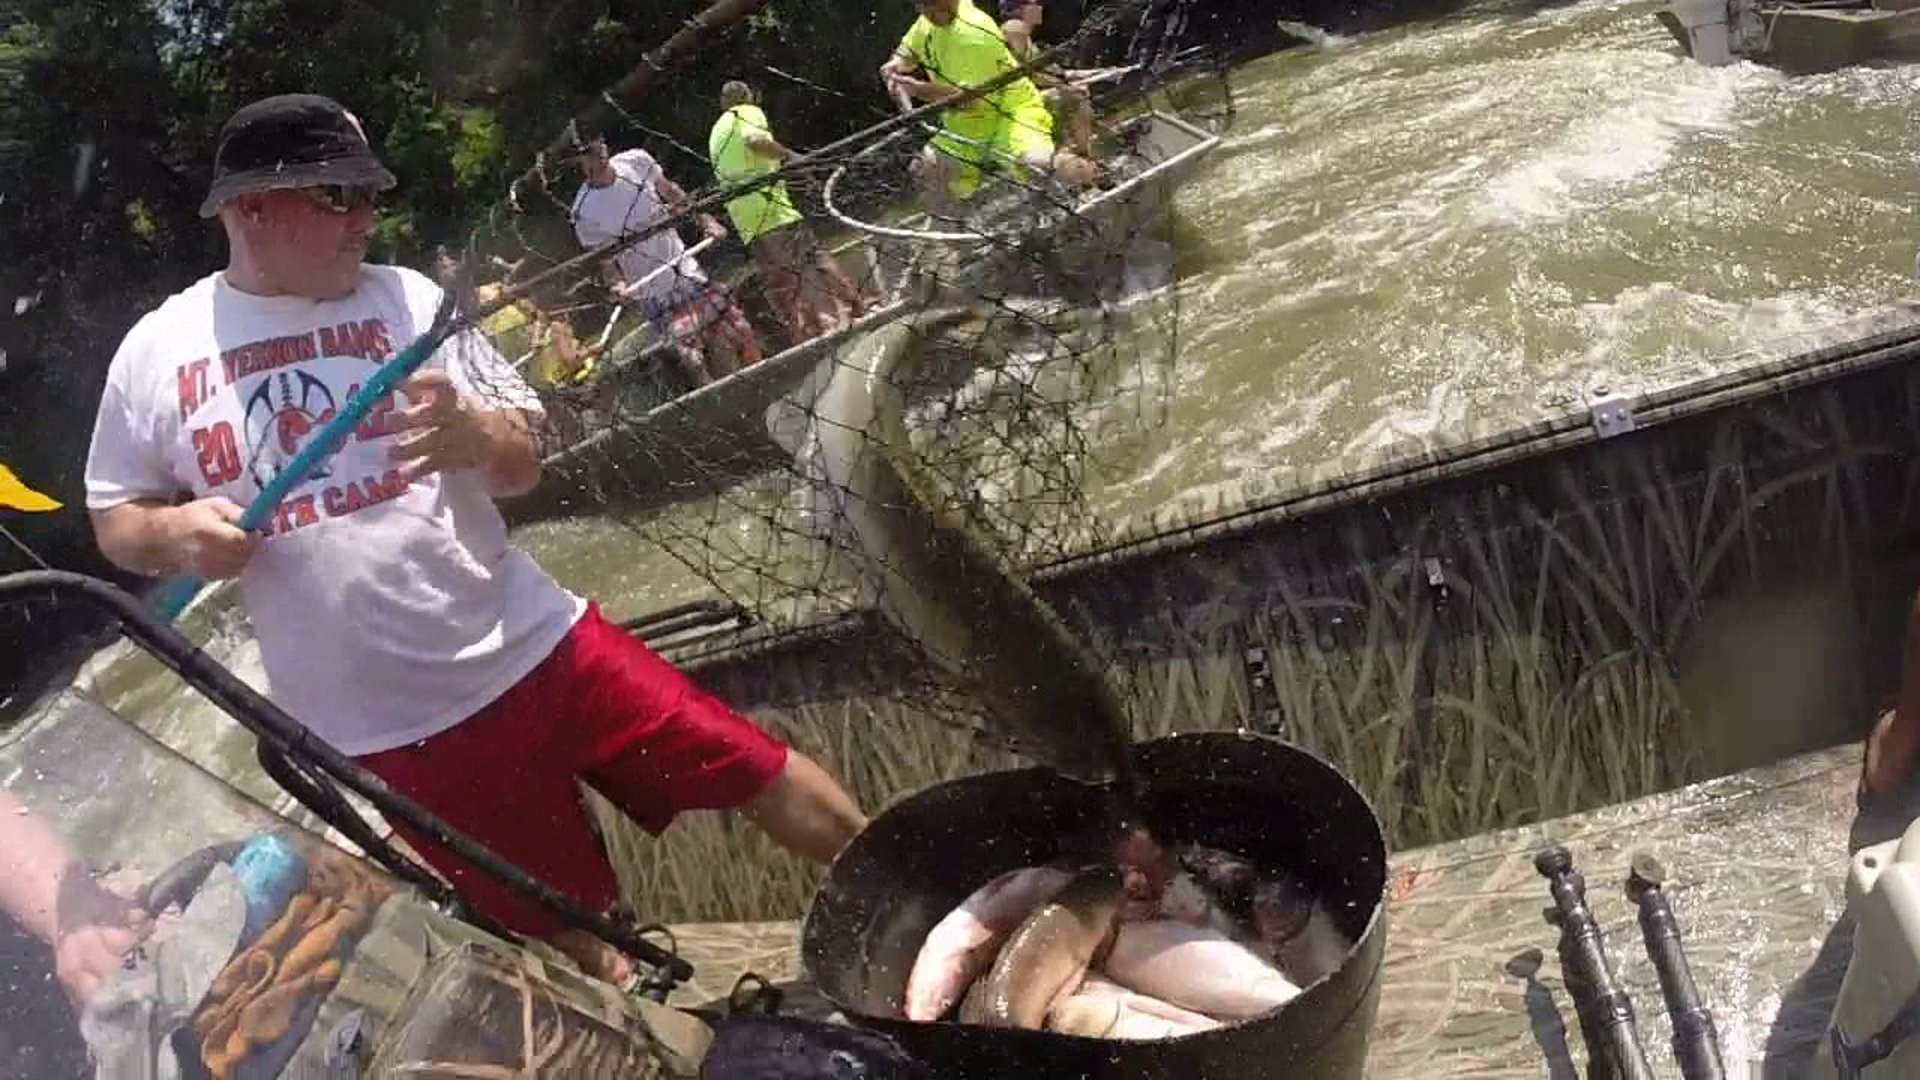 Redneck Fishing Tournament is an Illinois tradition